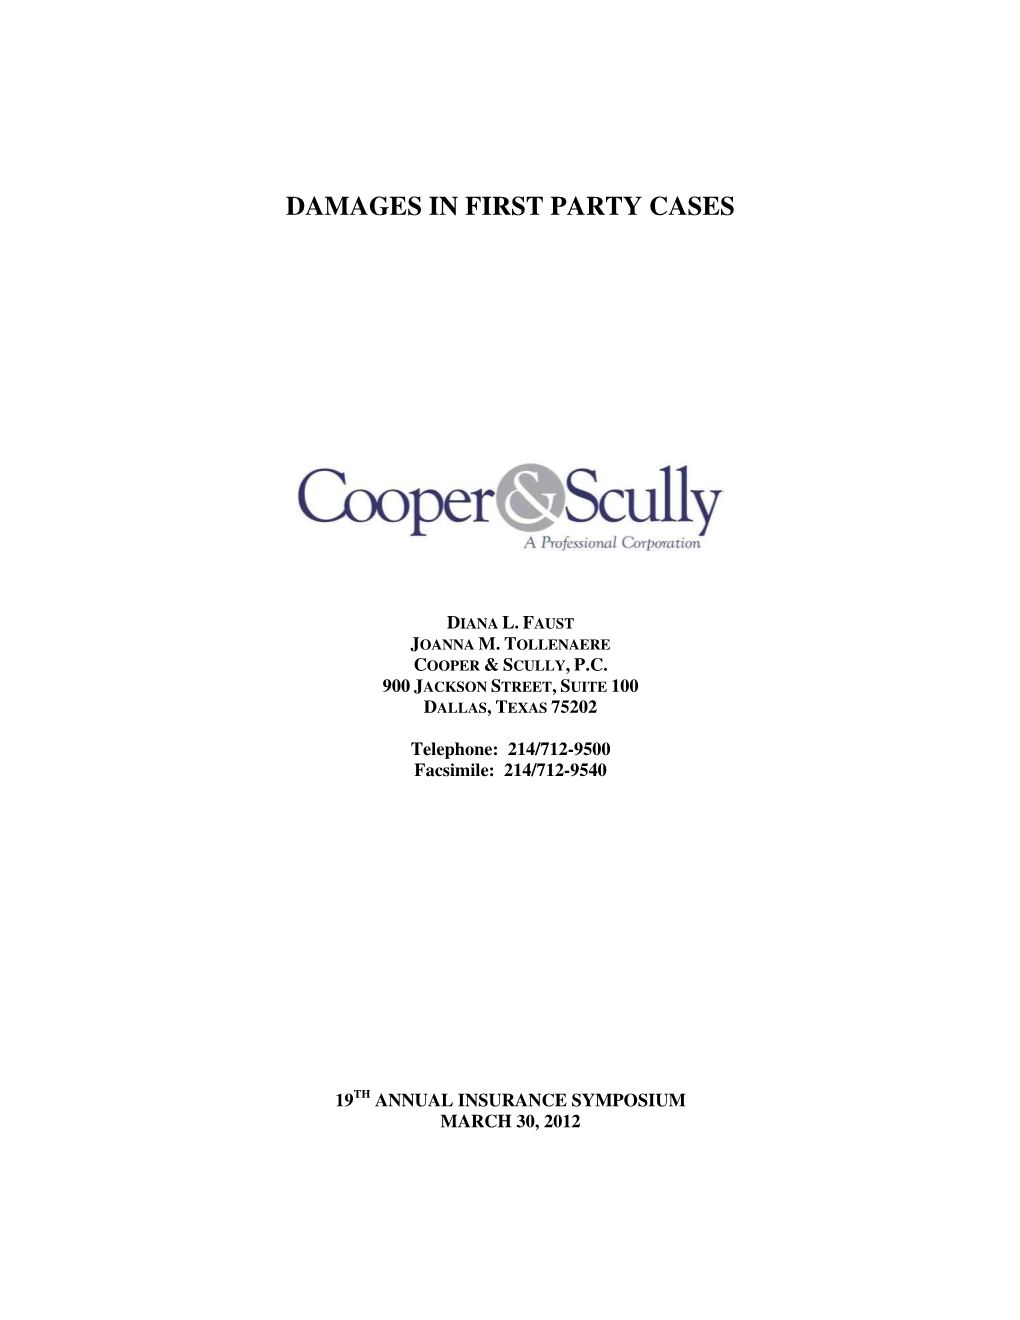 Damages in First Party Cases